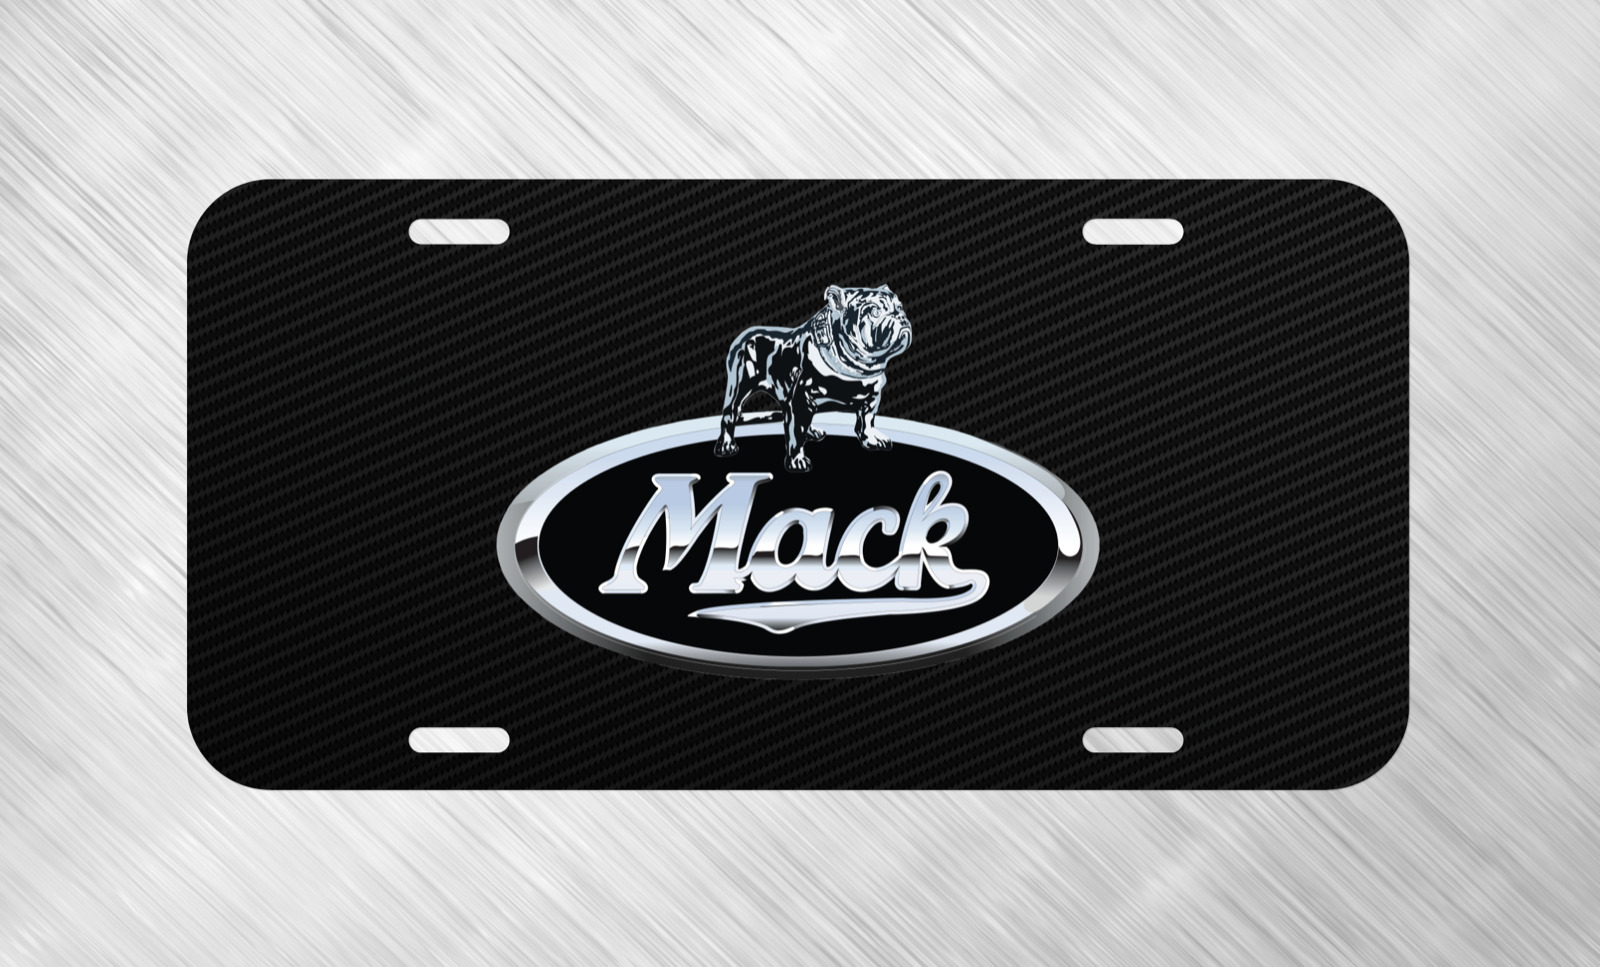 Simulated Carbon For Mack Semi Truck License Plate Auto Car Tag  